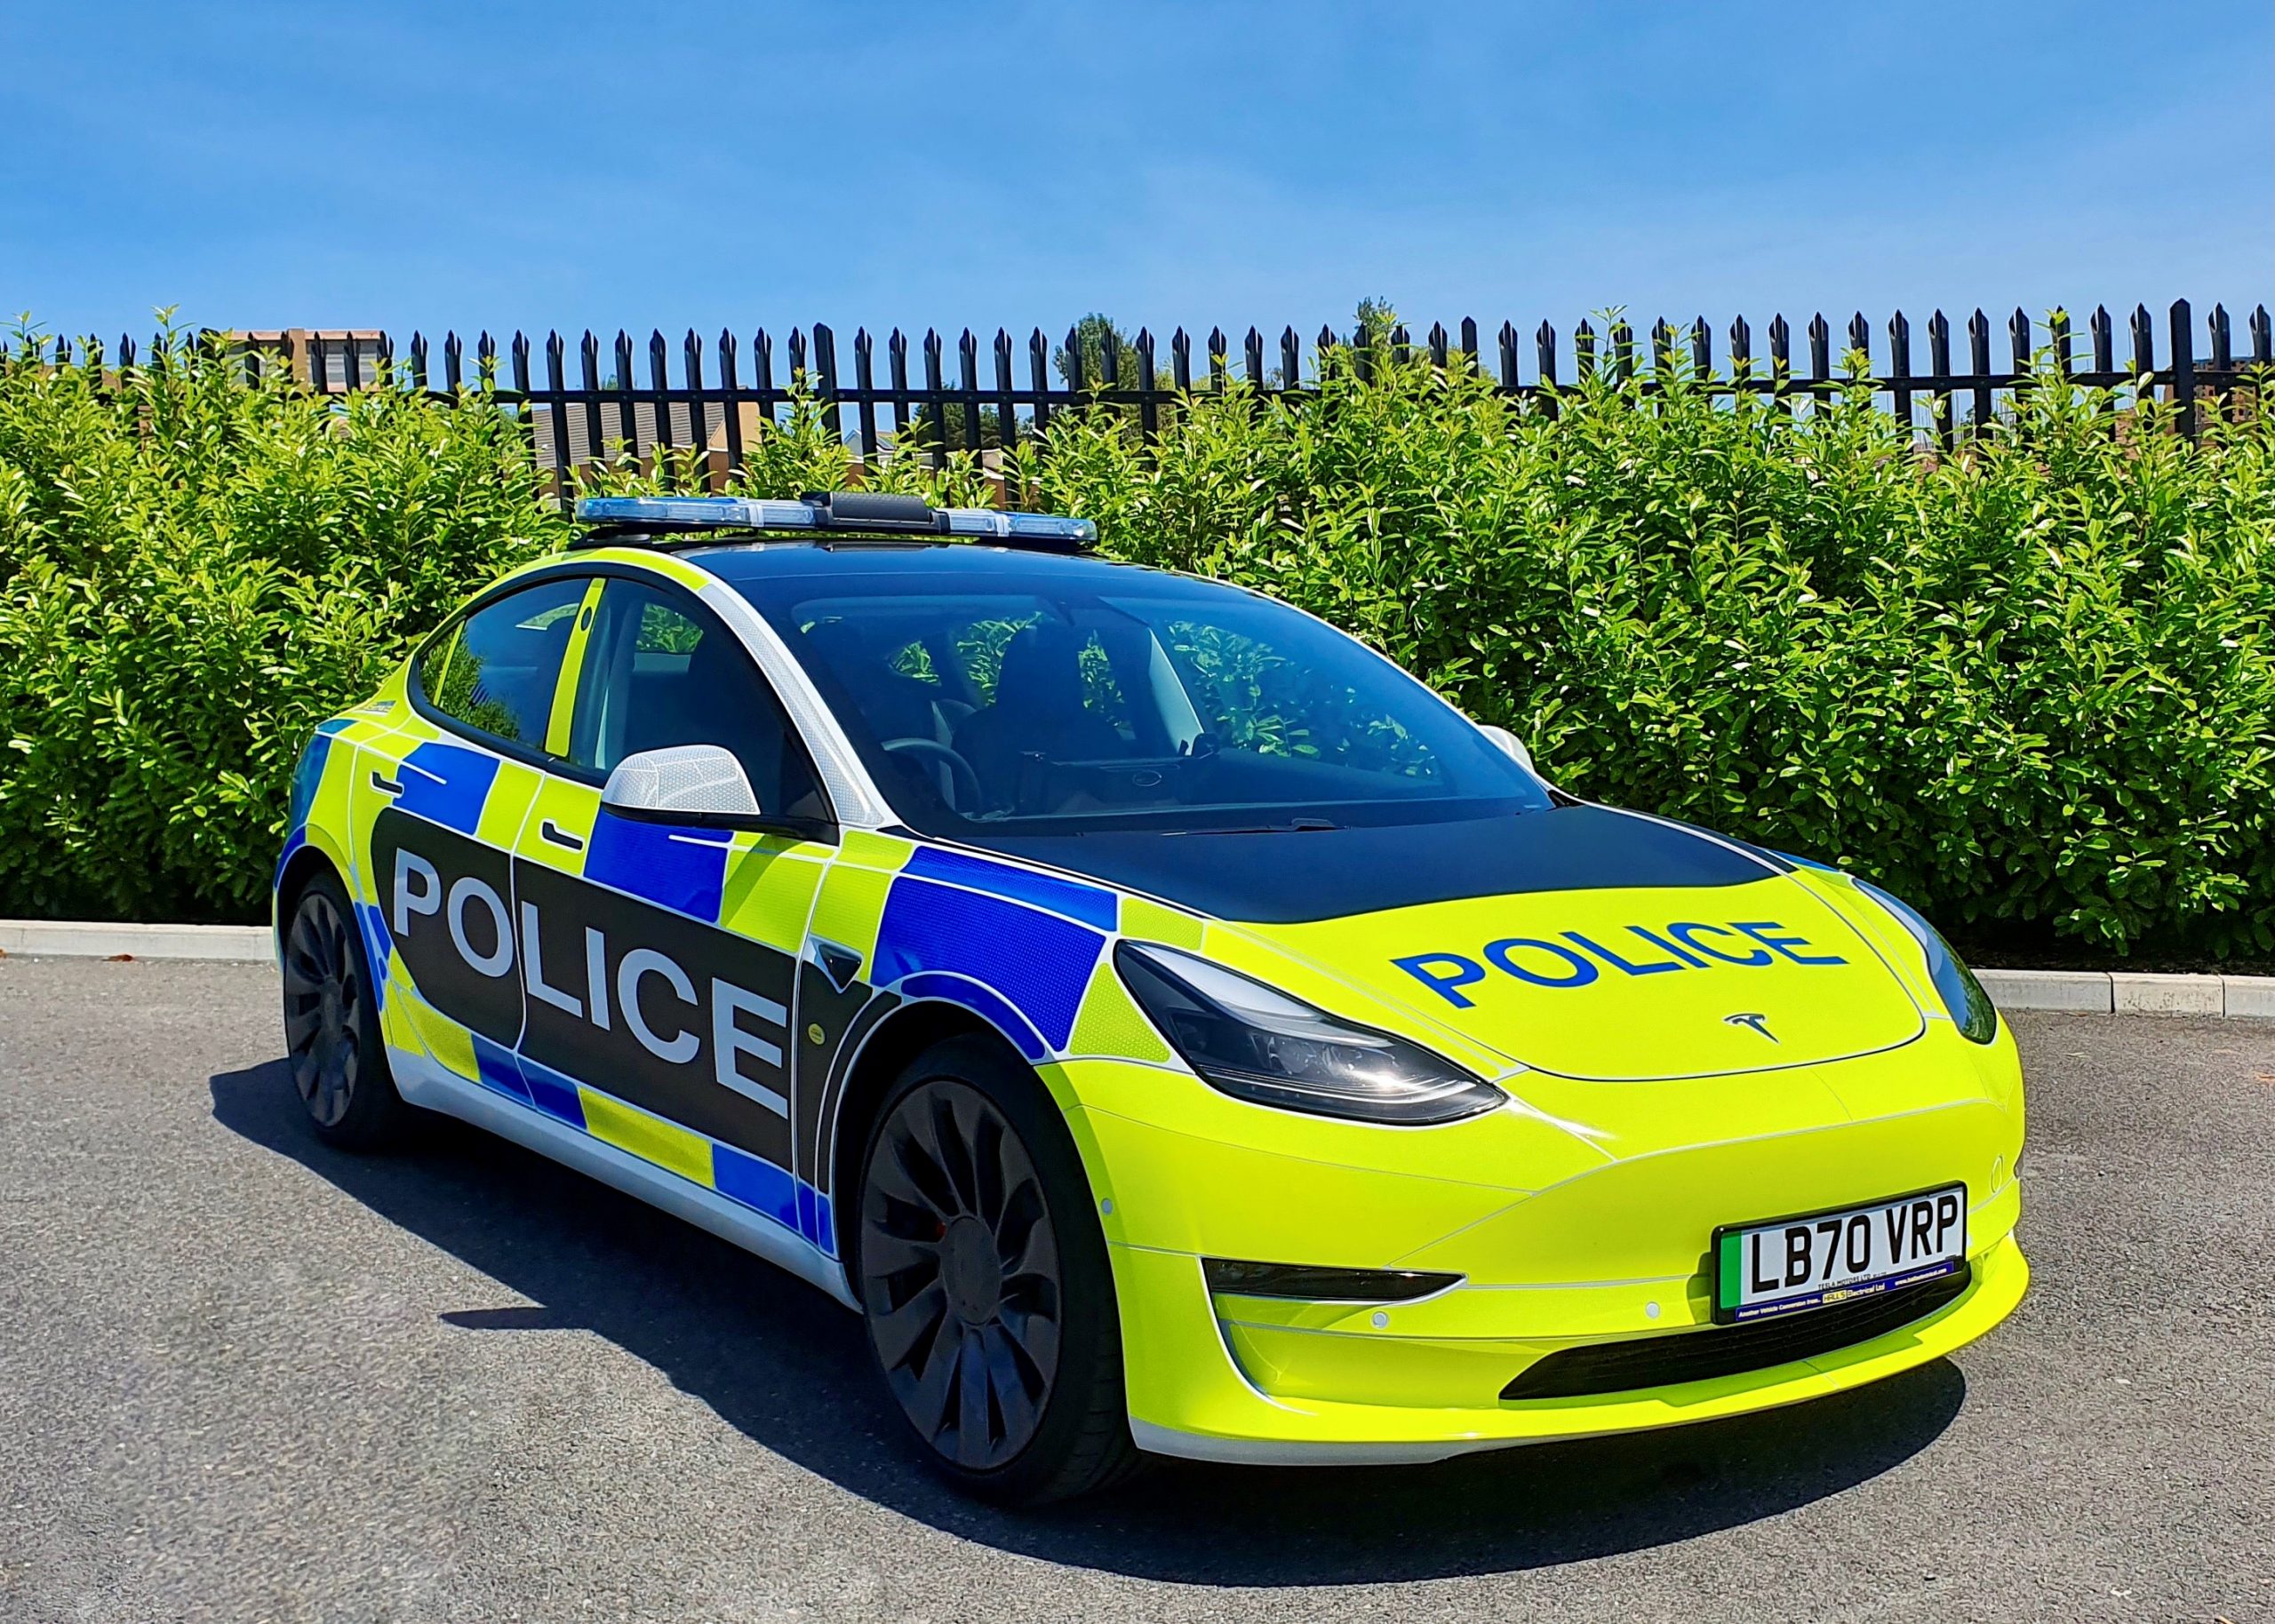 Tesla Model 3 police cars are ready for testing by UK forces Car